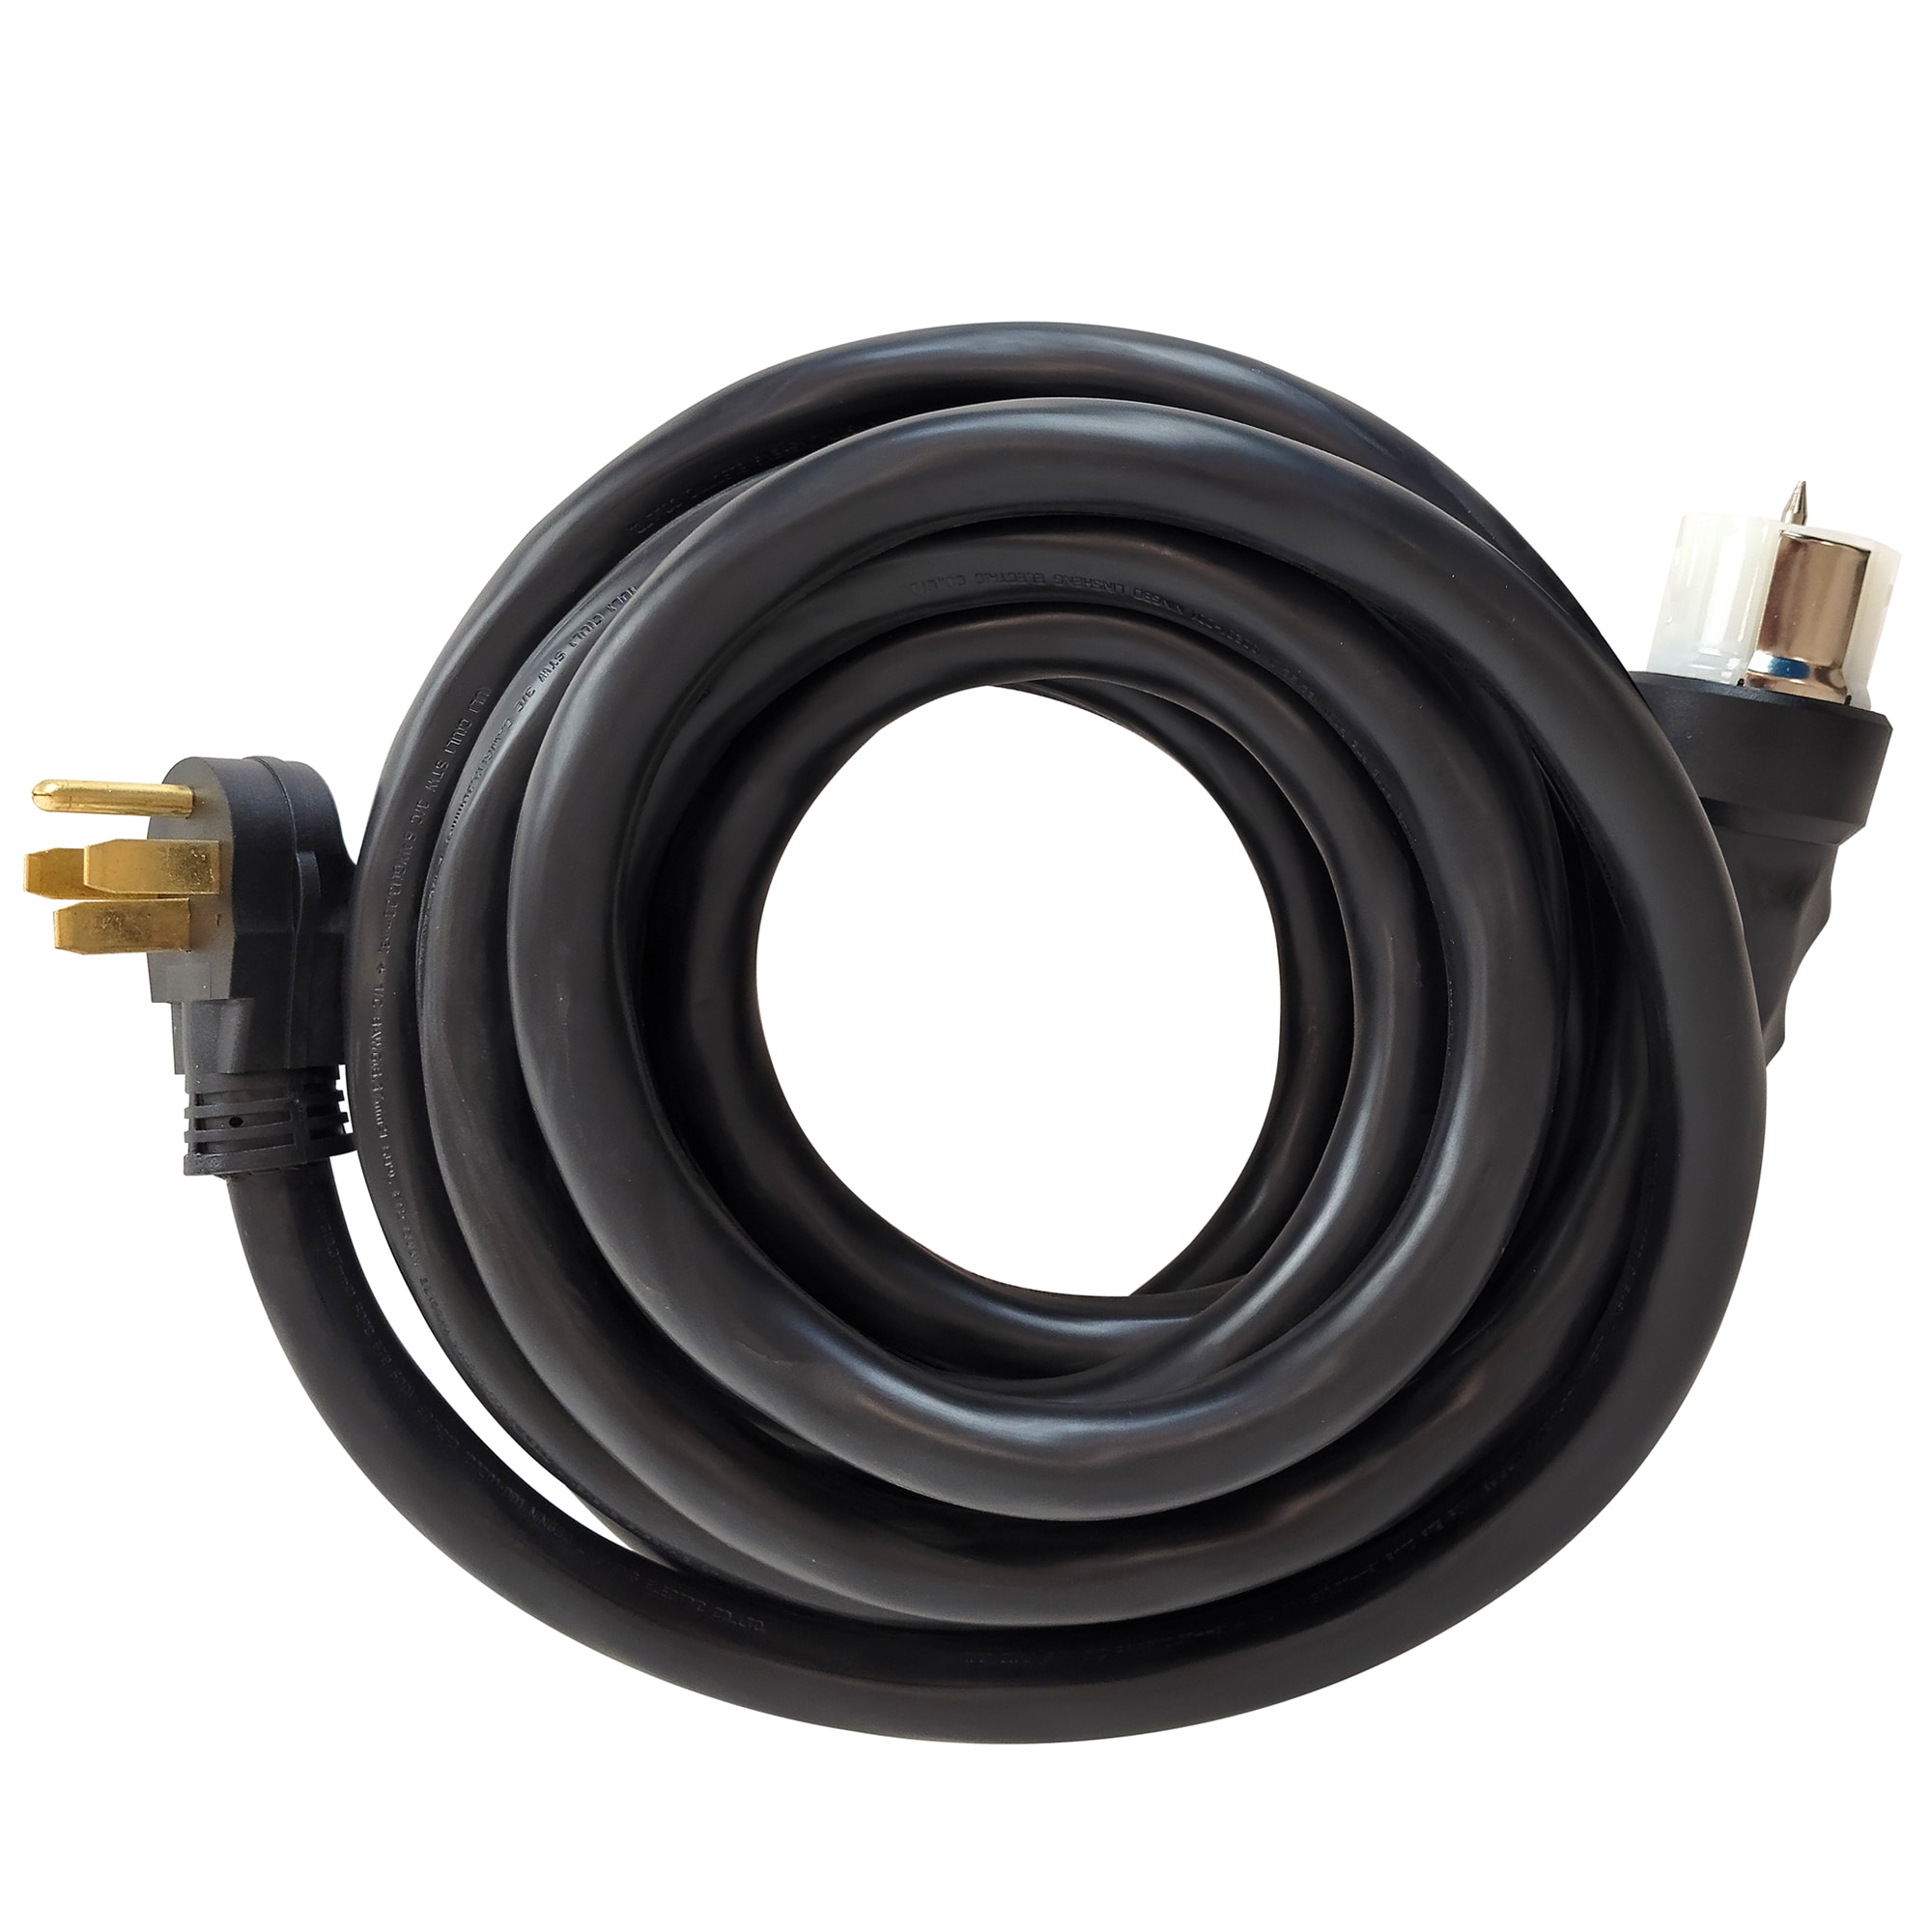 Powerback Rubber Duct Cord Covers